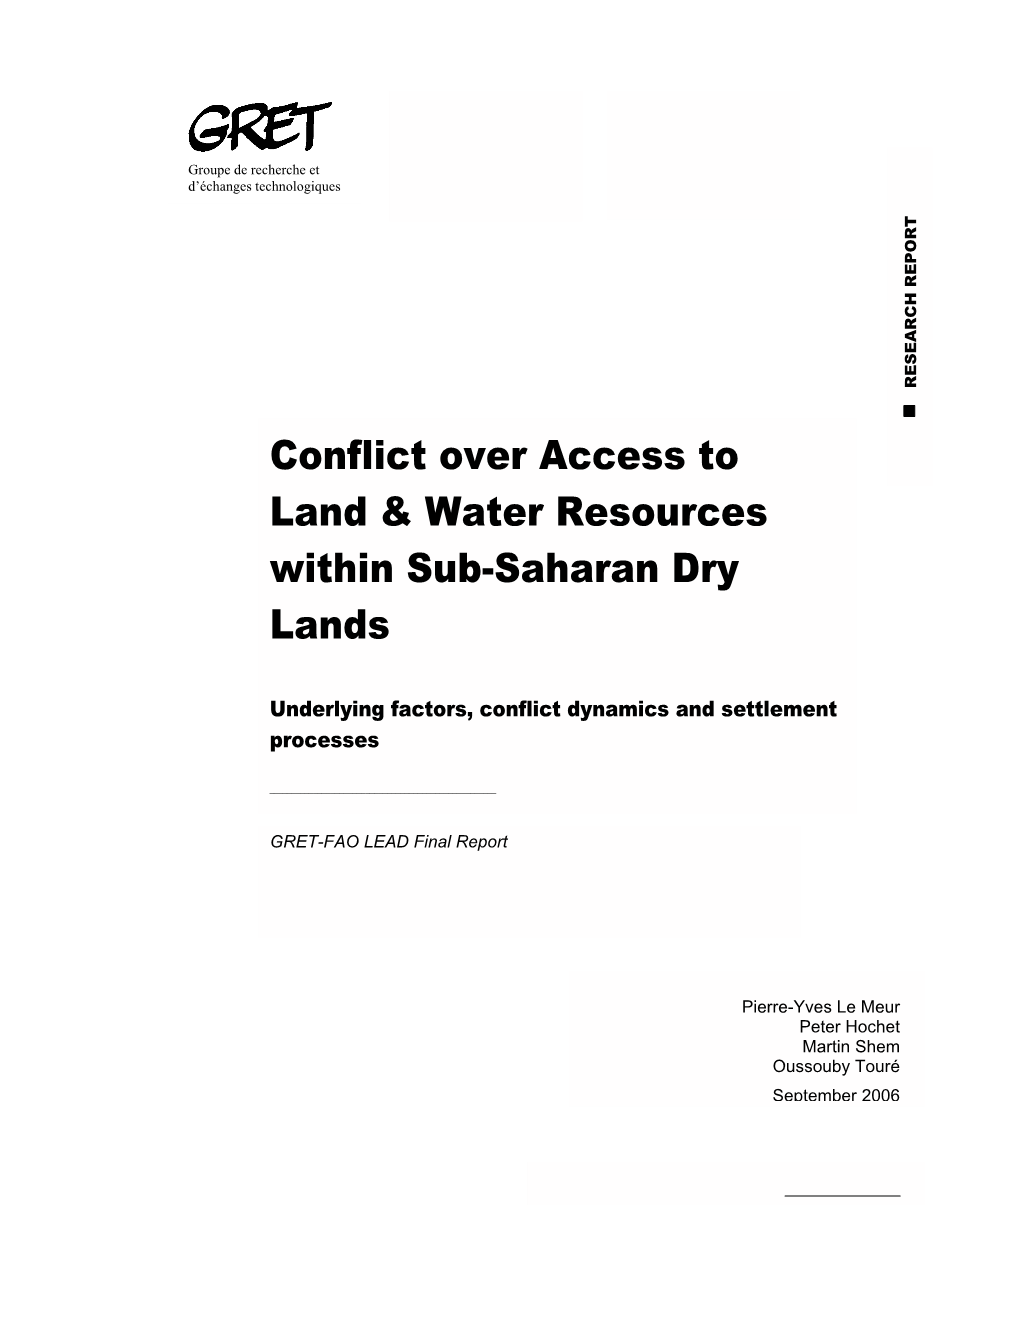 Conflict Over Access to Land & Water Resources Within Sub-Saharan Dry